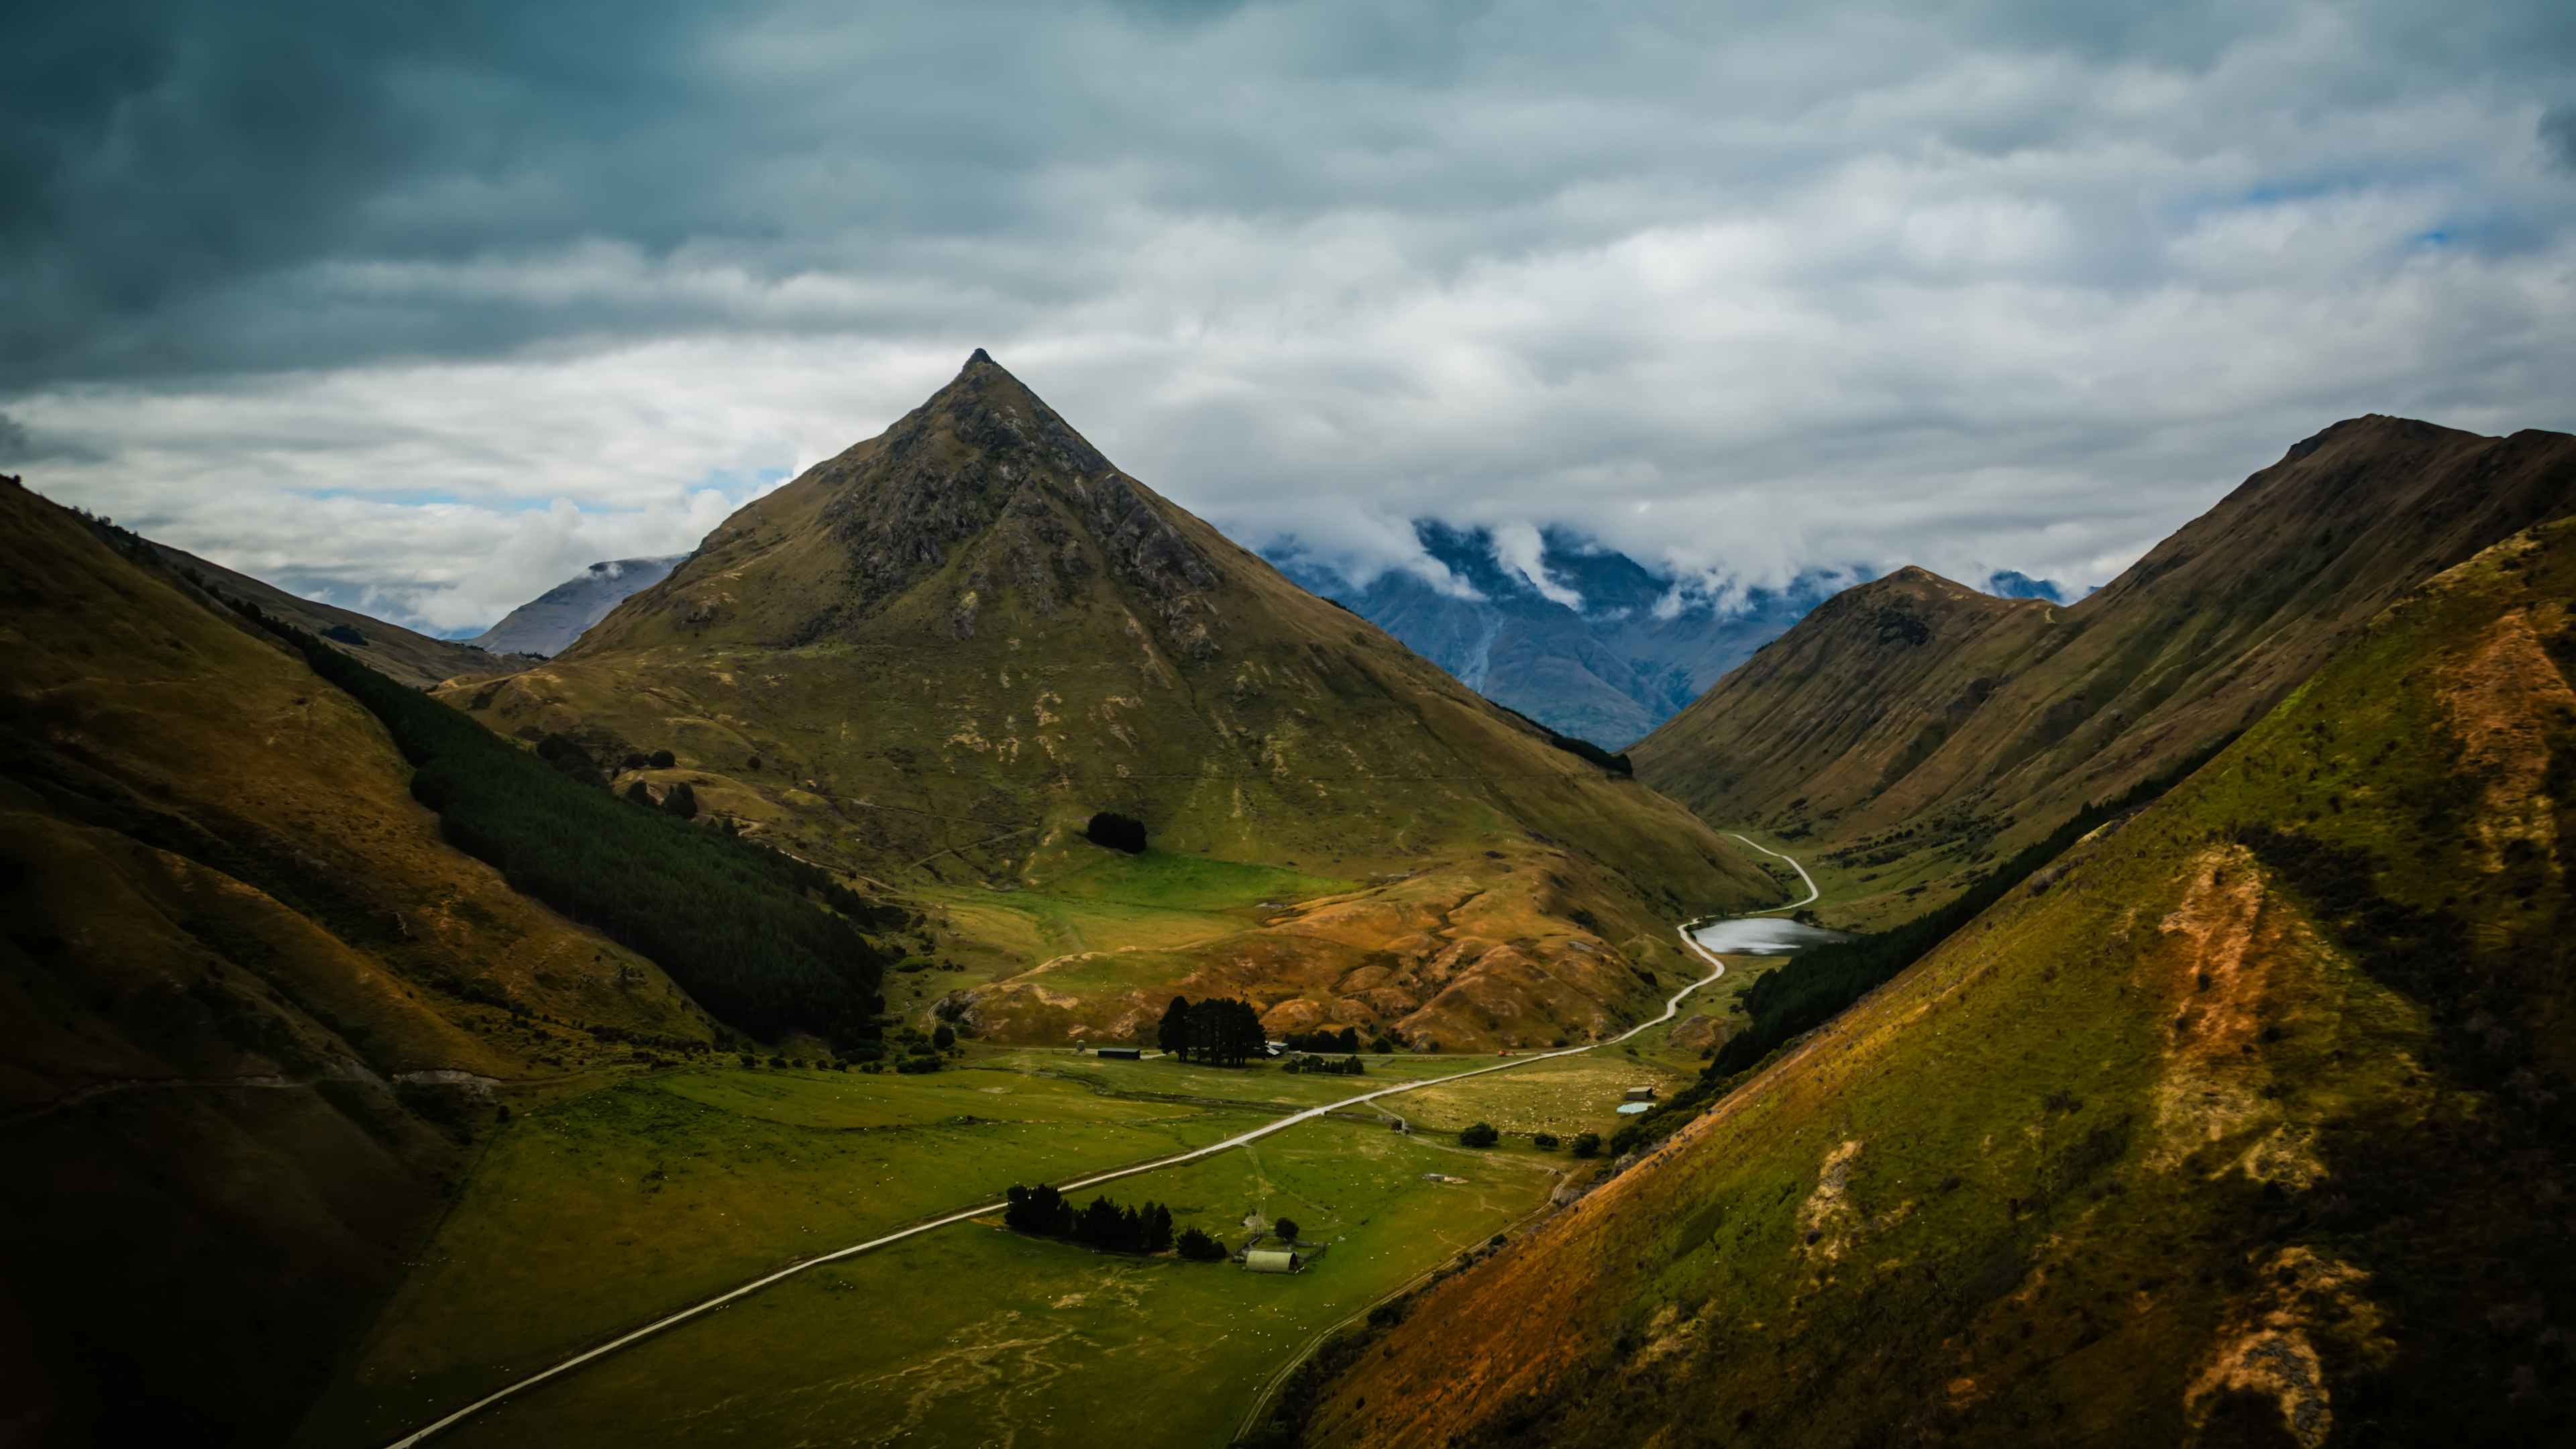 General 3840x2160 4K landscape New Zealand Queenstown mountains nature clouds sky